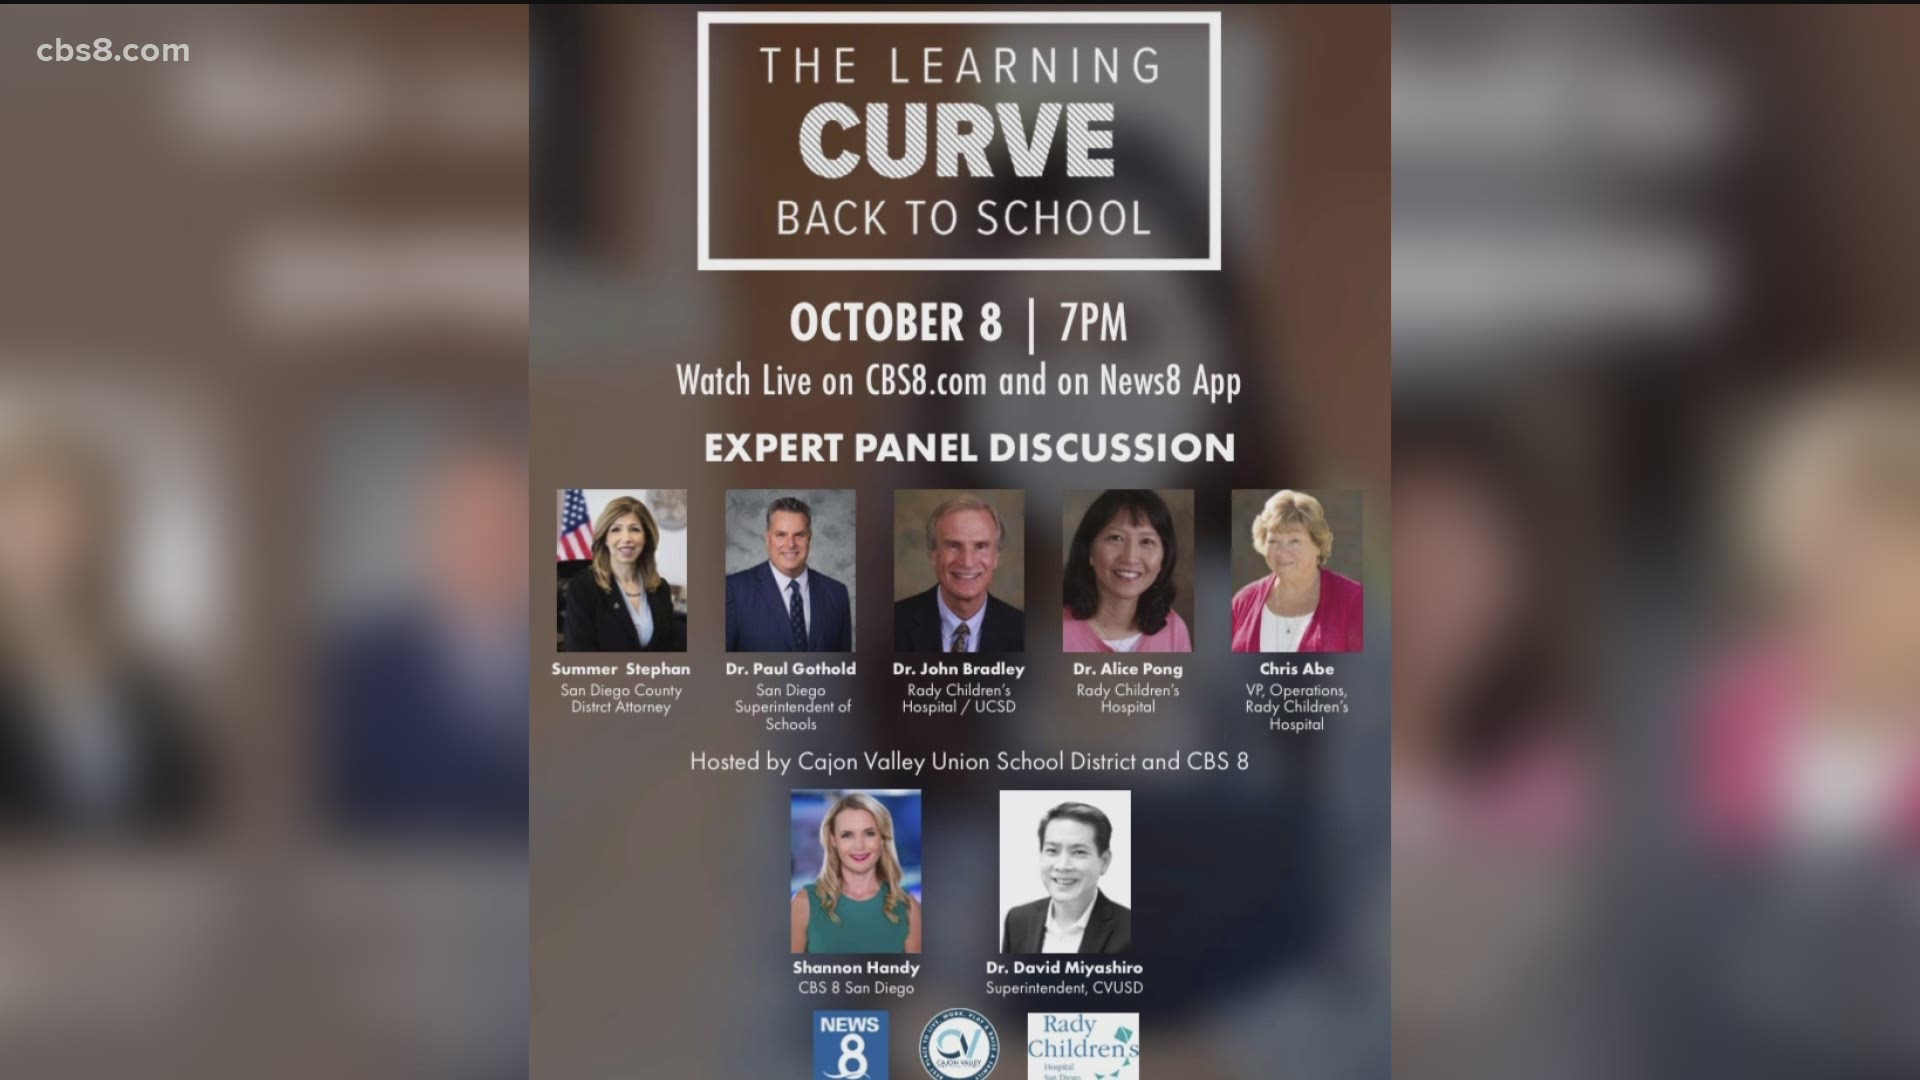 Watch the expert panel discussion live on Oct. 8 at 7 p.m. at cbs8.com and CBS 8 App.